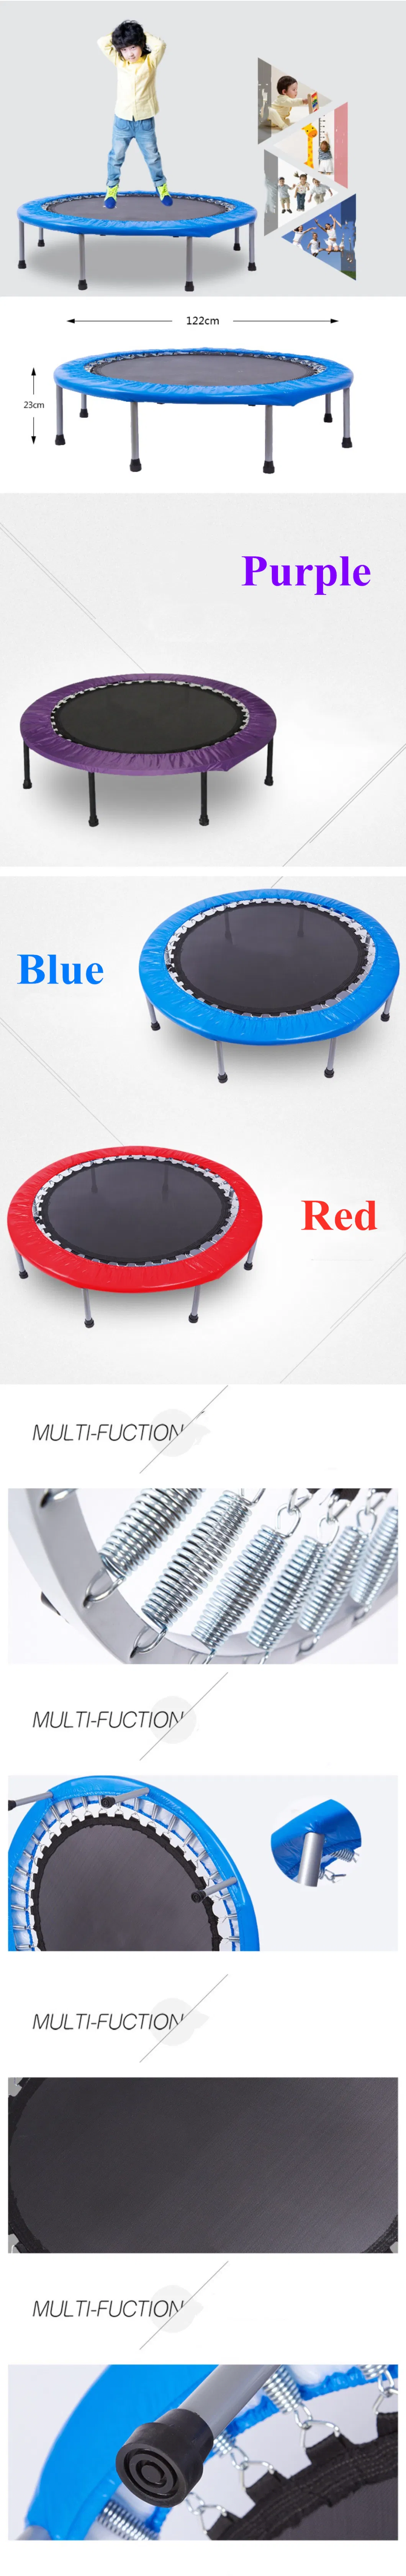 Mini Trampoline Professional Outdoor Fitness for Kids Jumping Exercise Multifunction Equipment